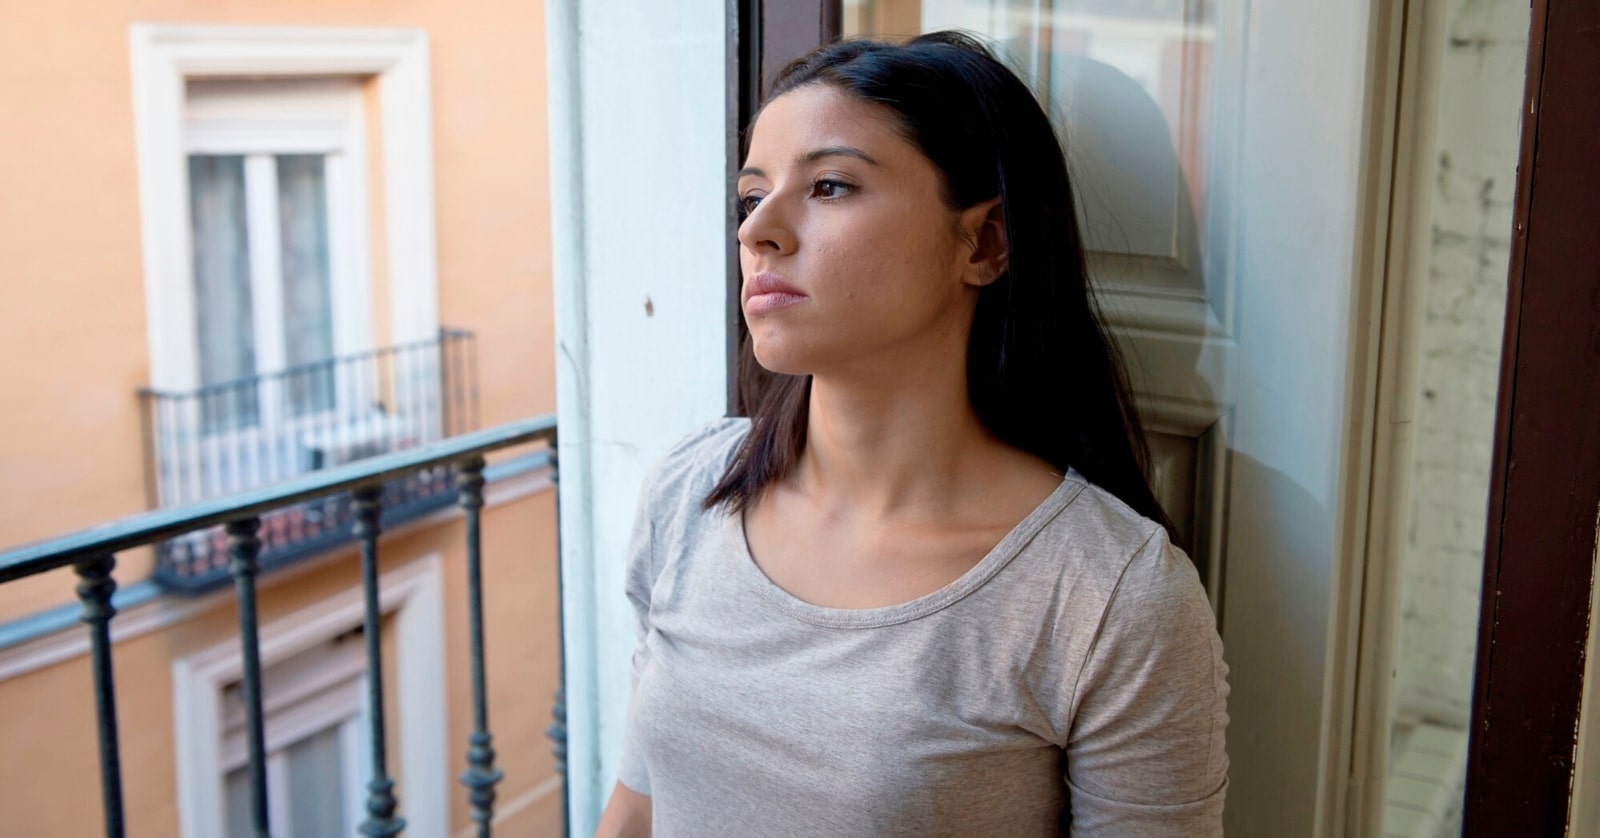 woman sitting by an open window balcony with a sad expression on her face